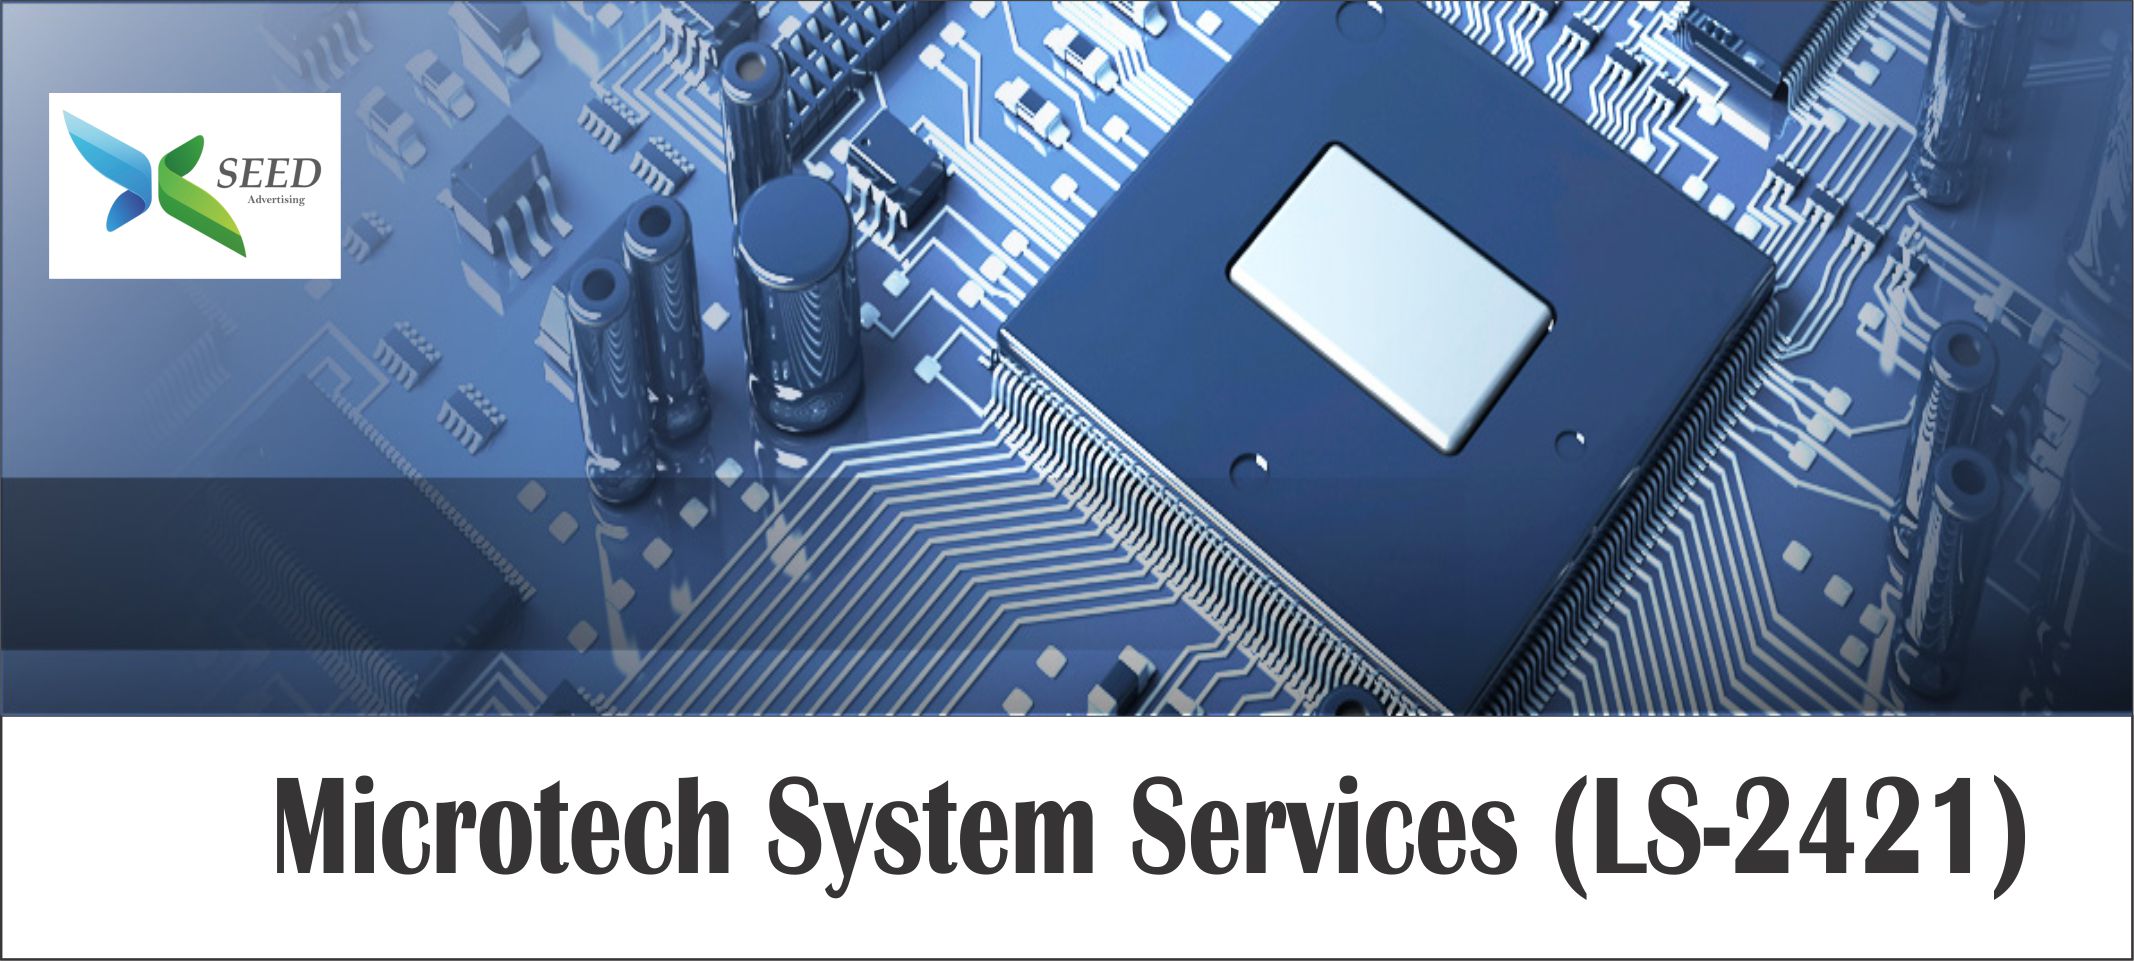 Microtech System Services 